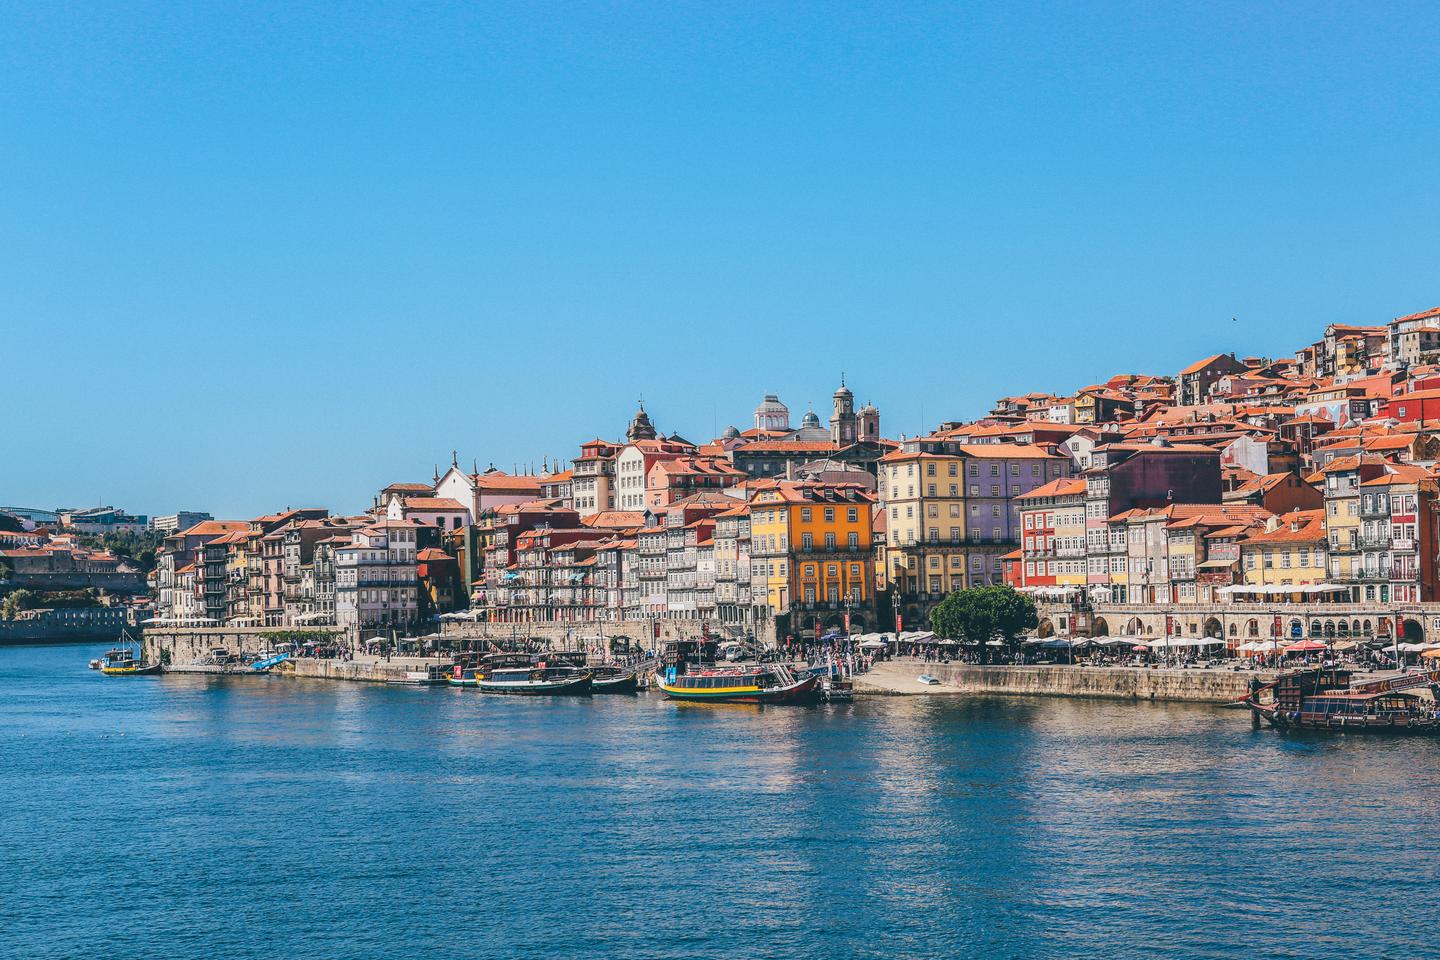 Porto is a great palace for remote workers worldwide